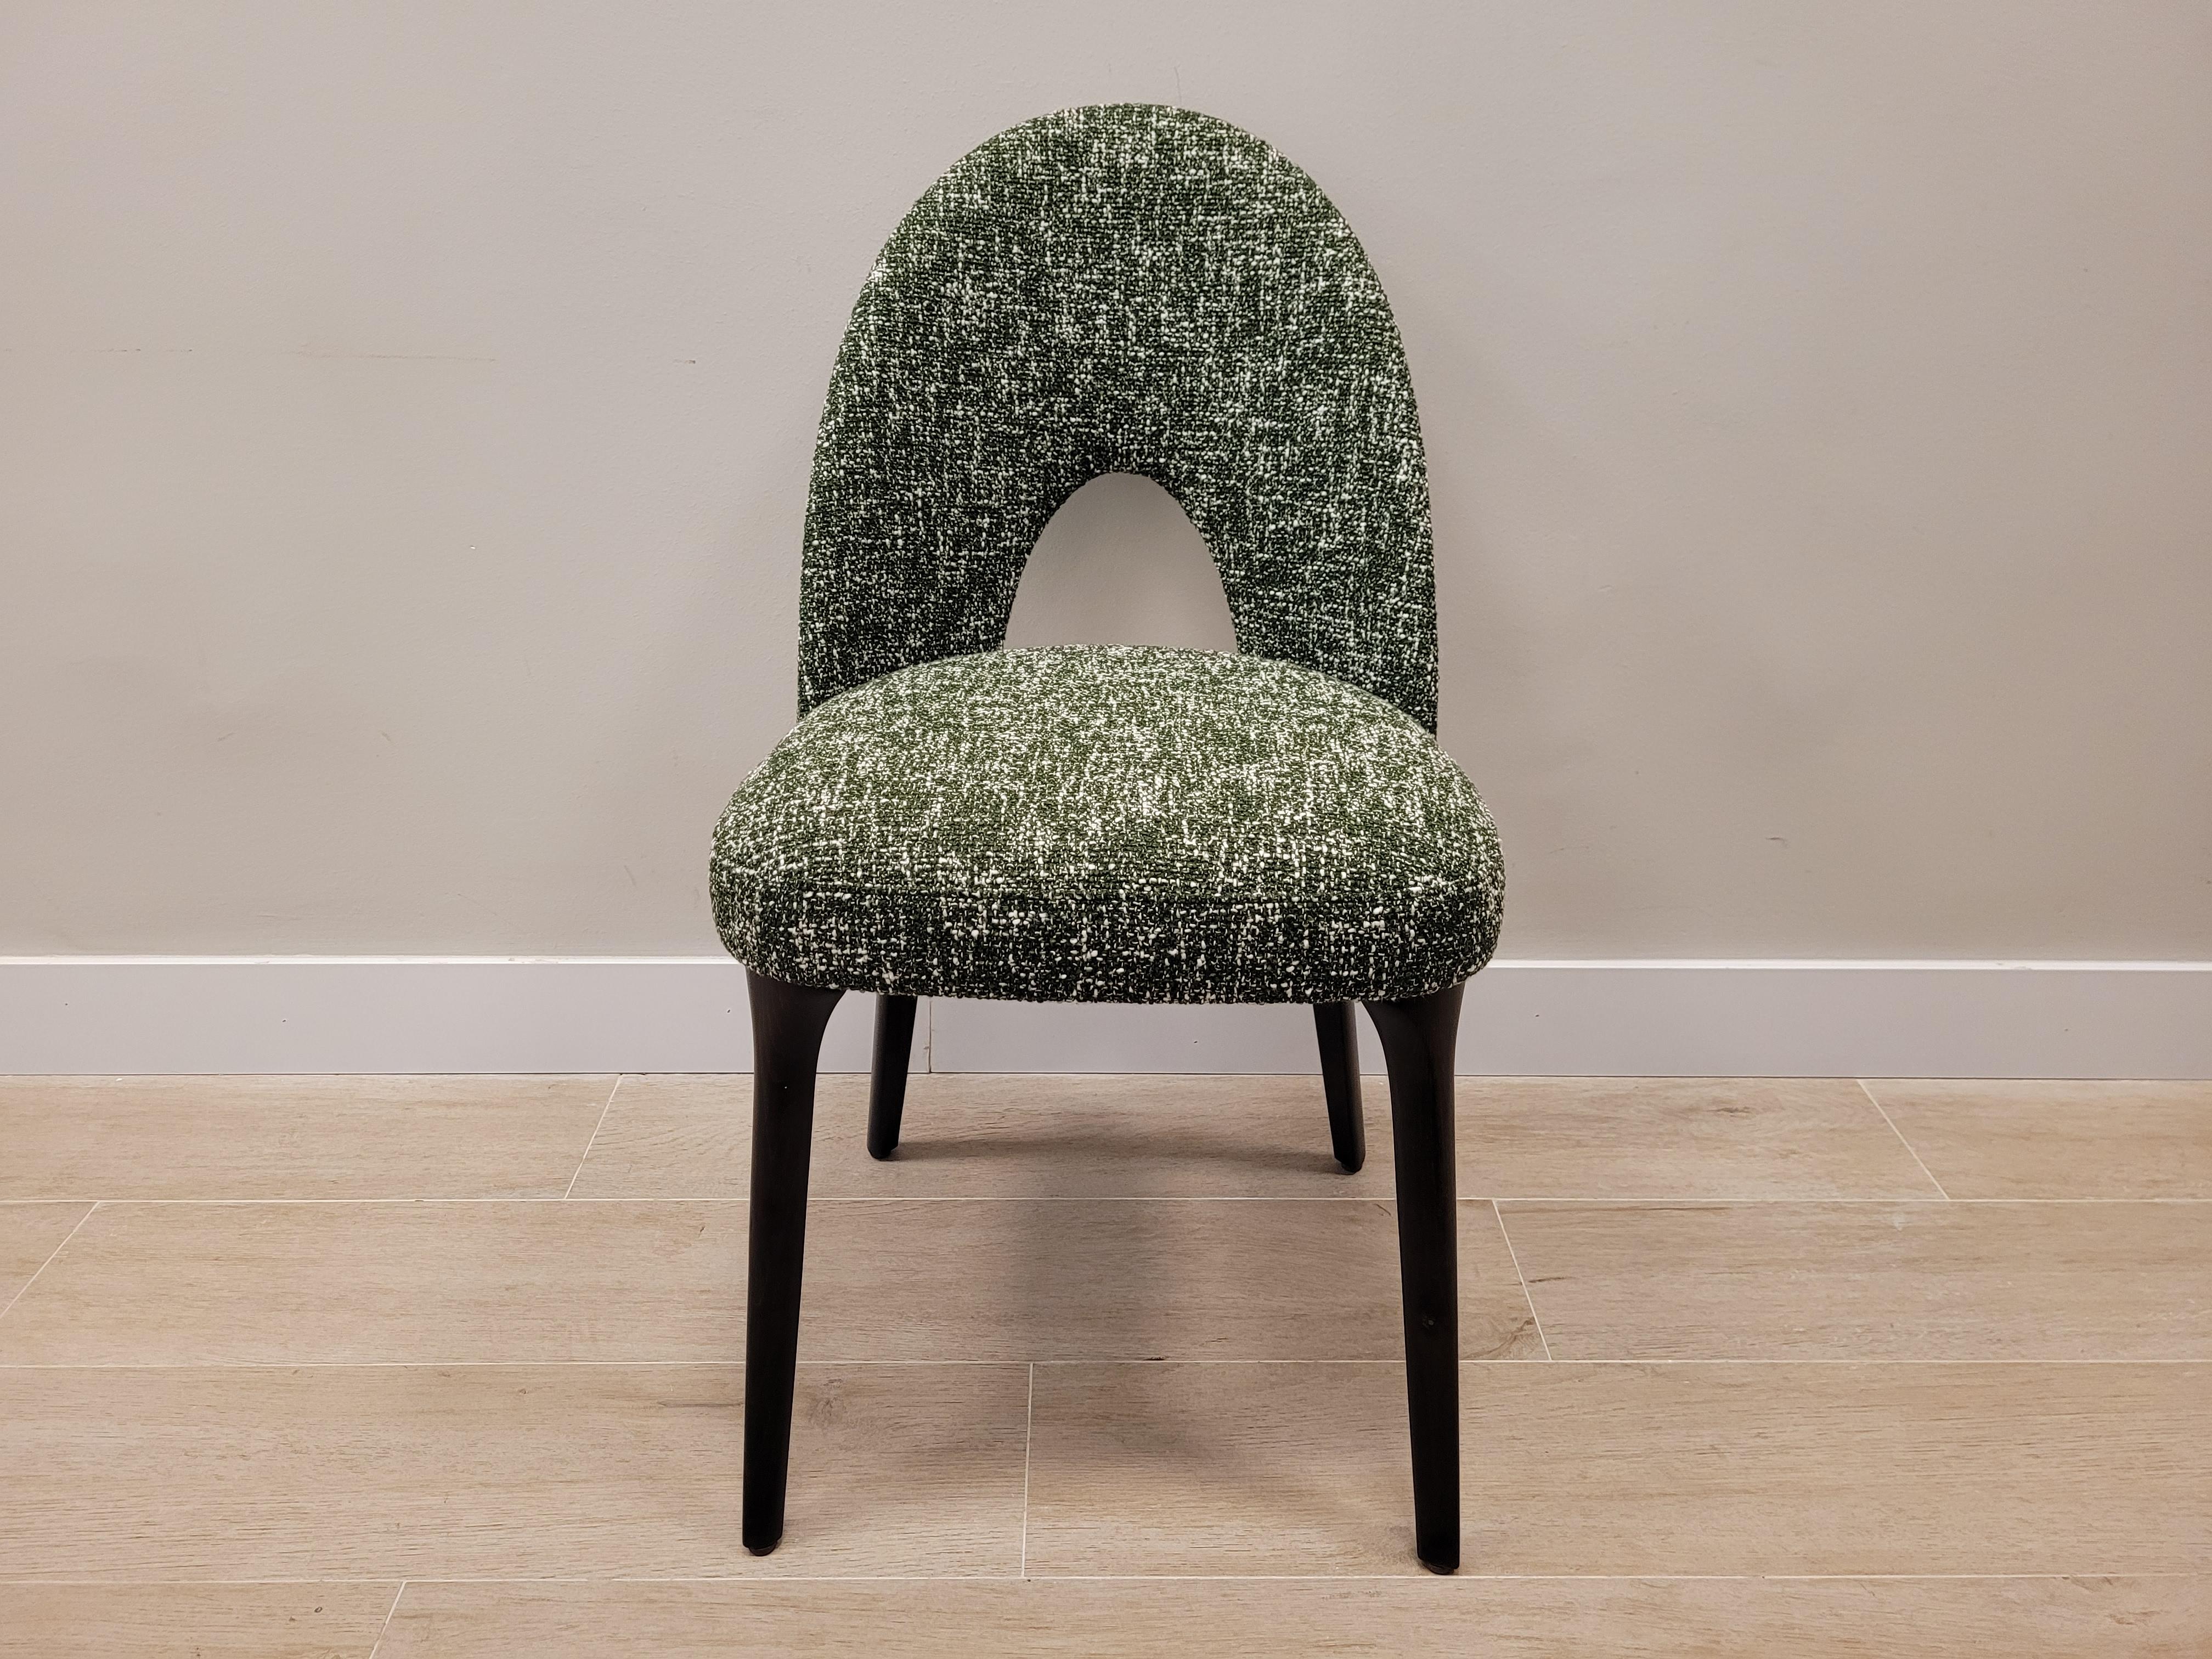 Hand-Crafted Roche Bobois Set of 4 Green Chairs, France